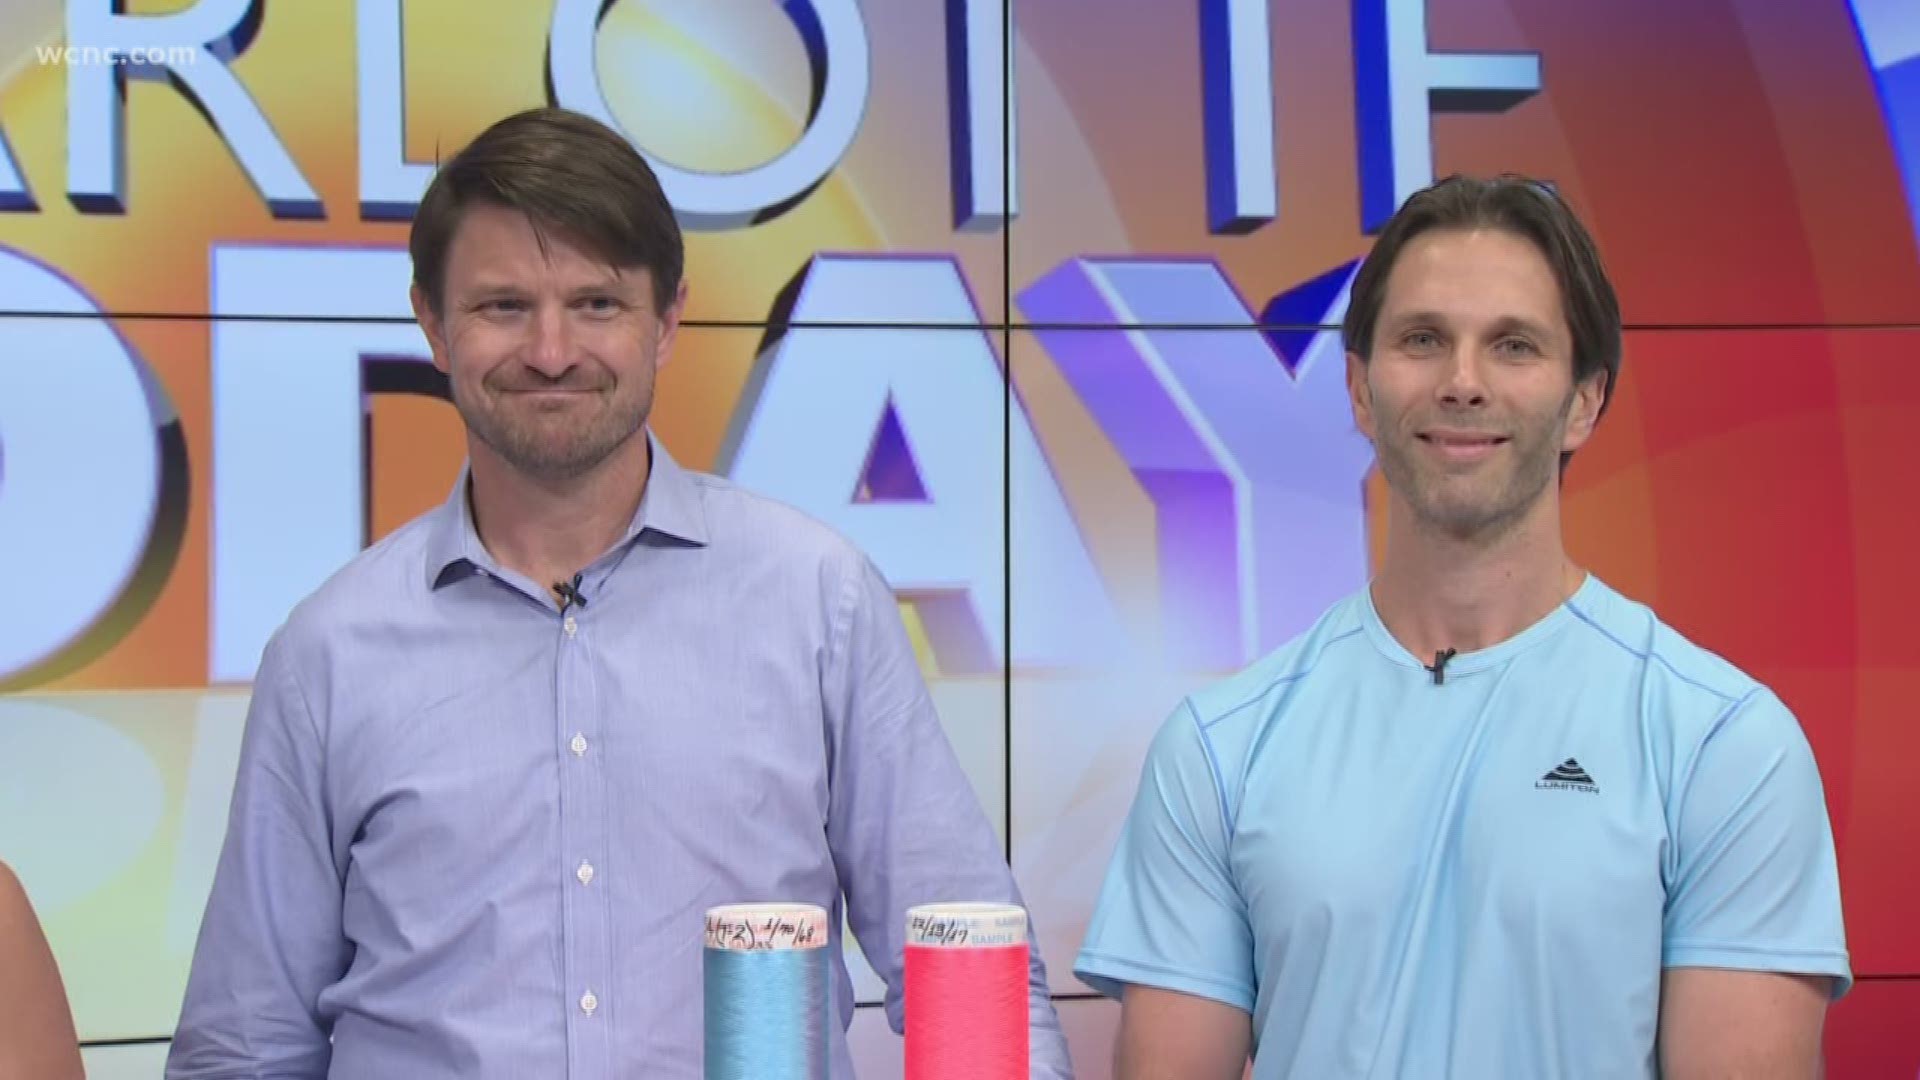 The creators of Sun- Energized clothing show us how it works